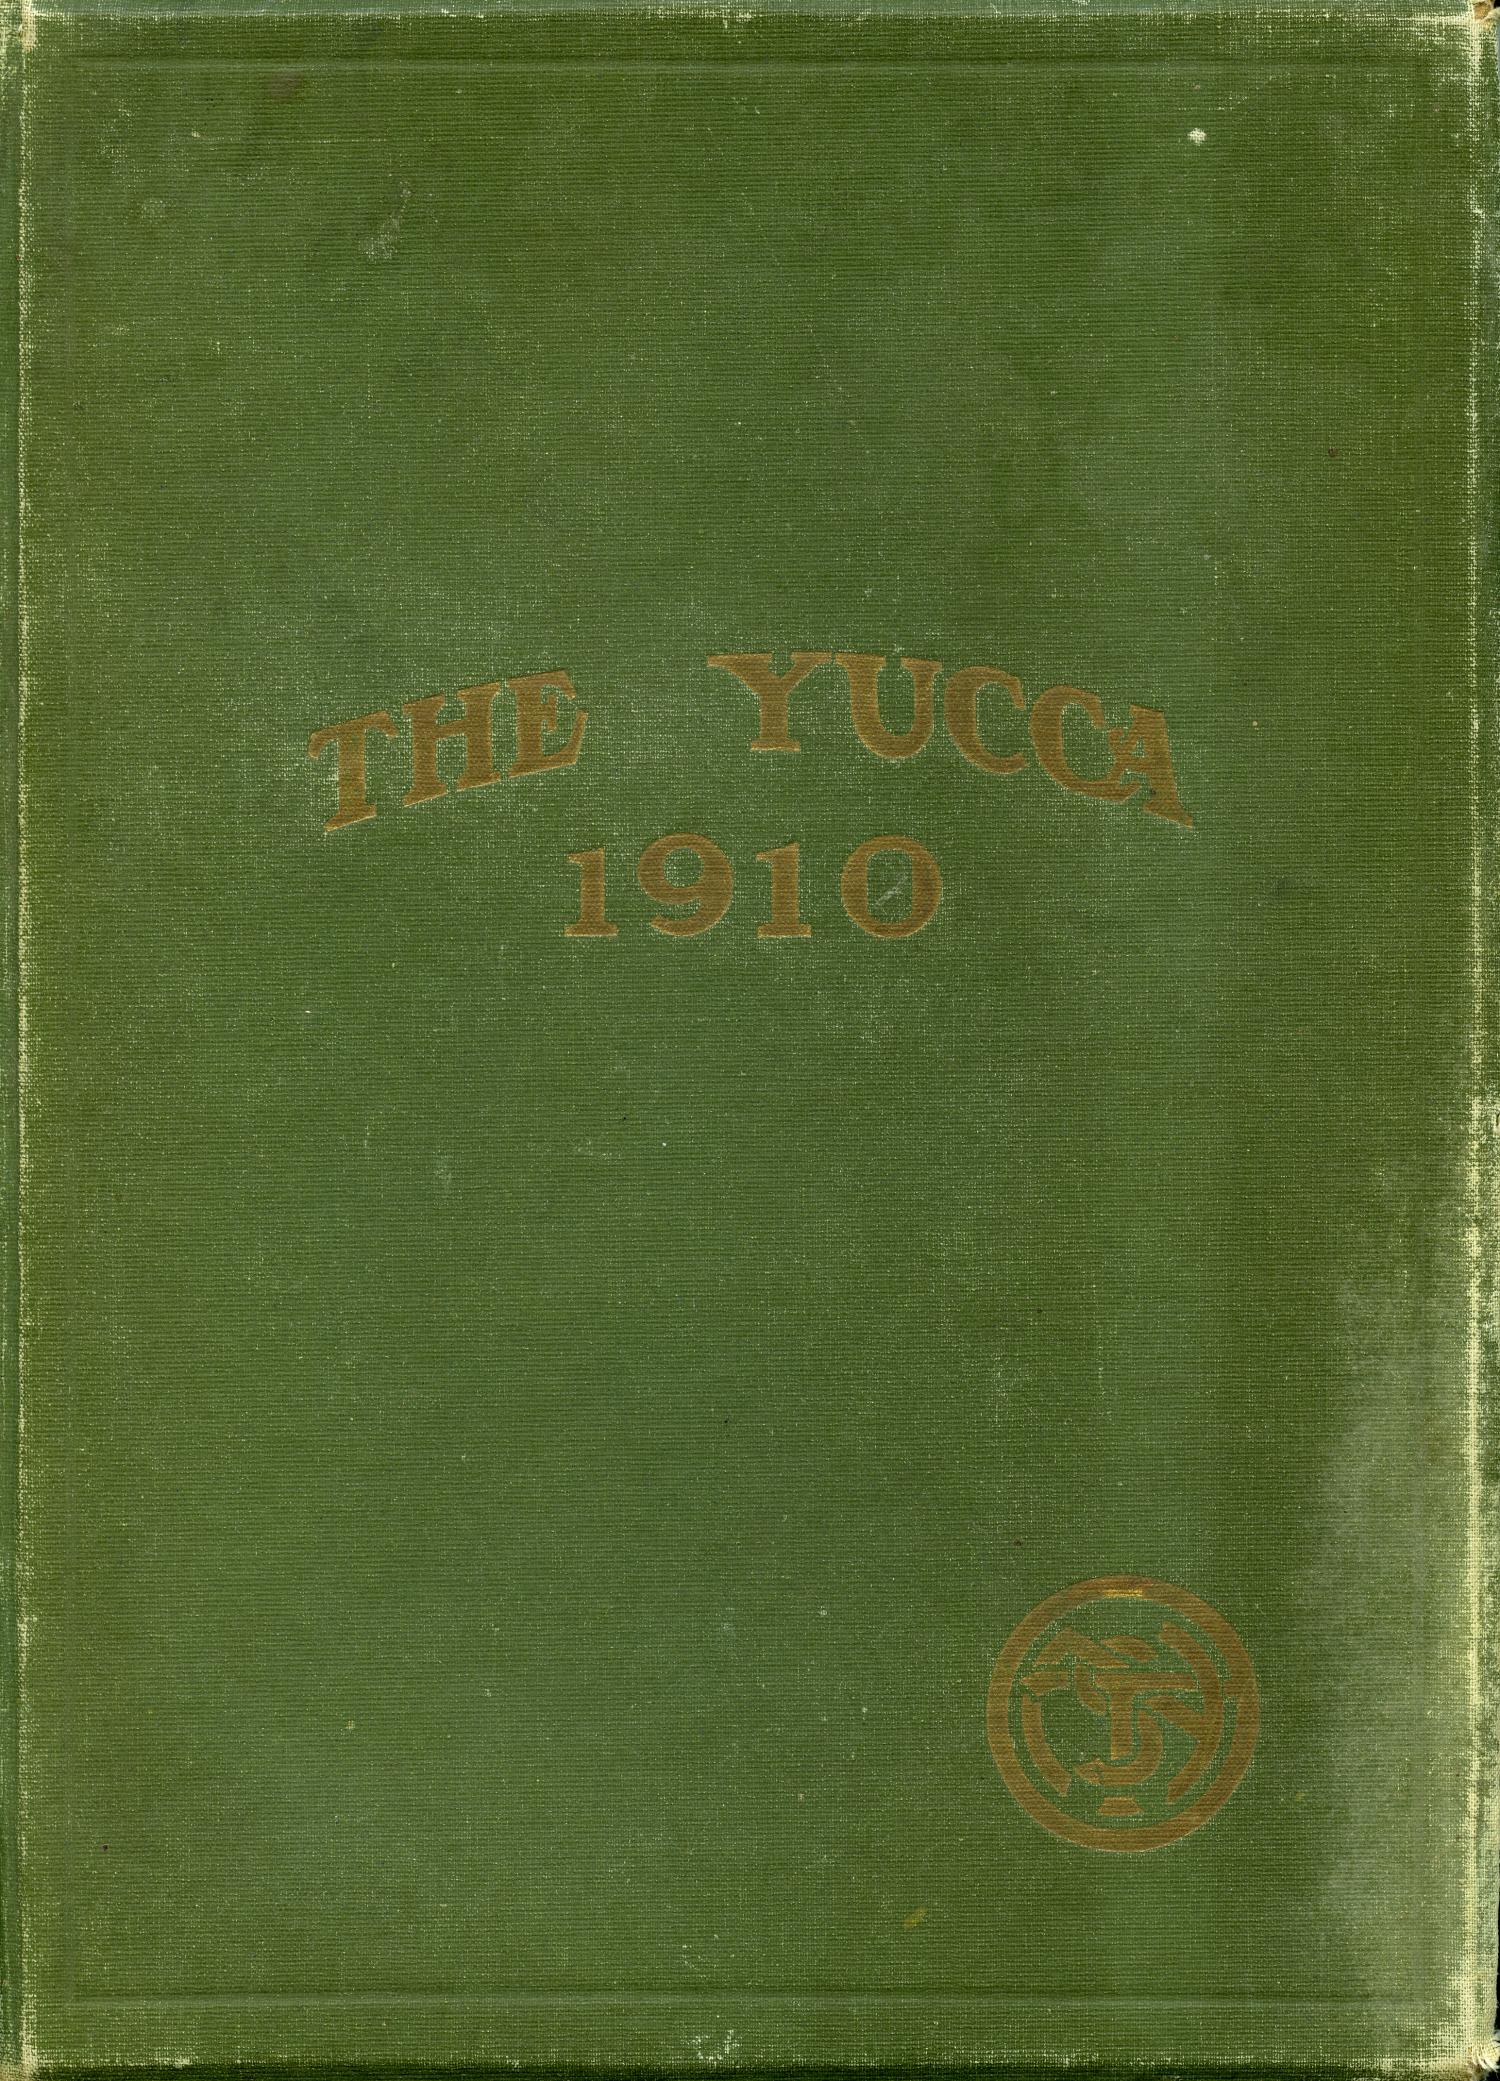 The Yucca, Yearbook of North Texas State Normal School, 1910
                                                
                                                    Front Cover
                                                